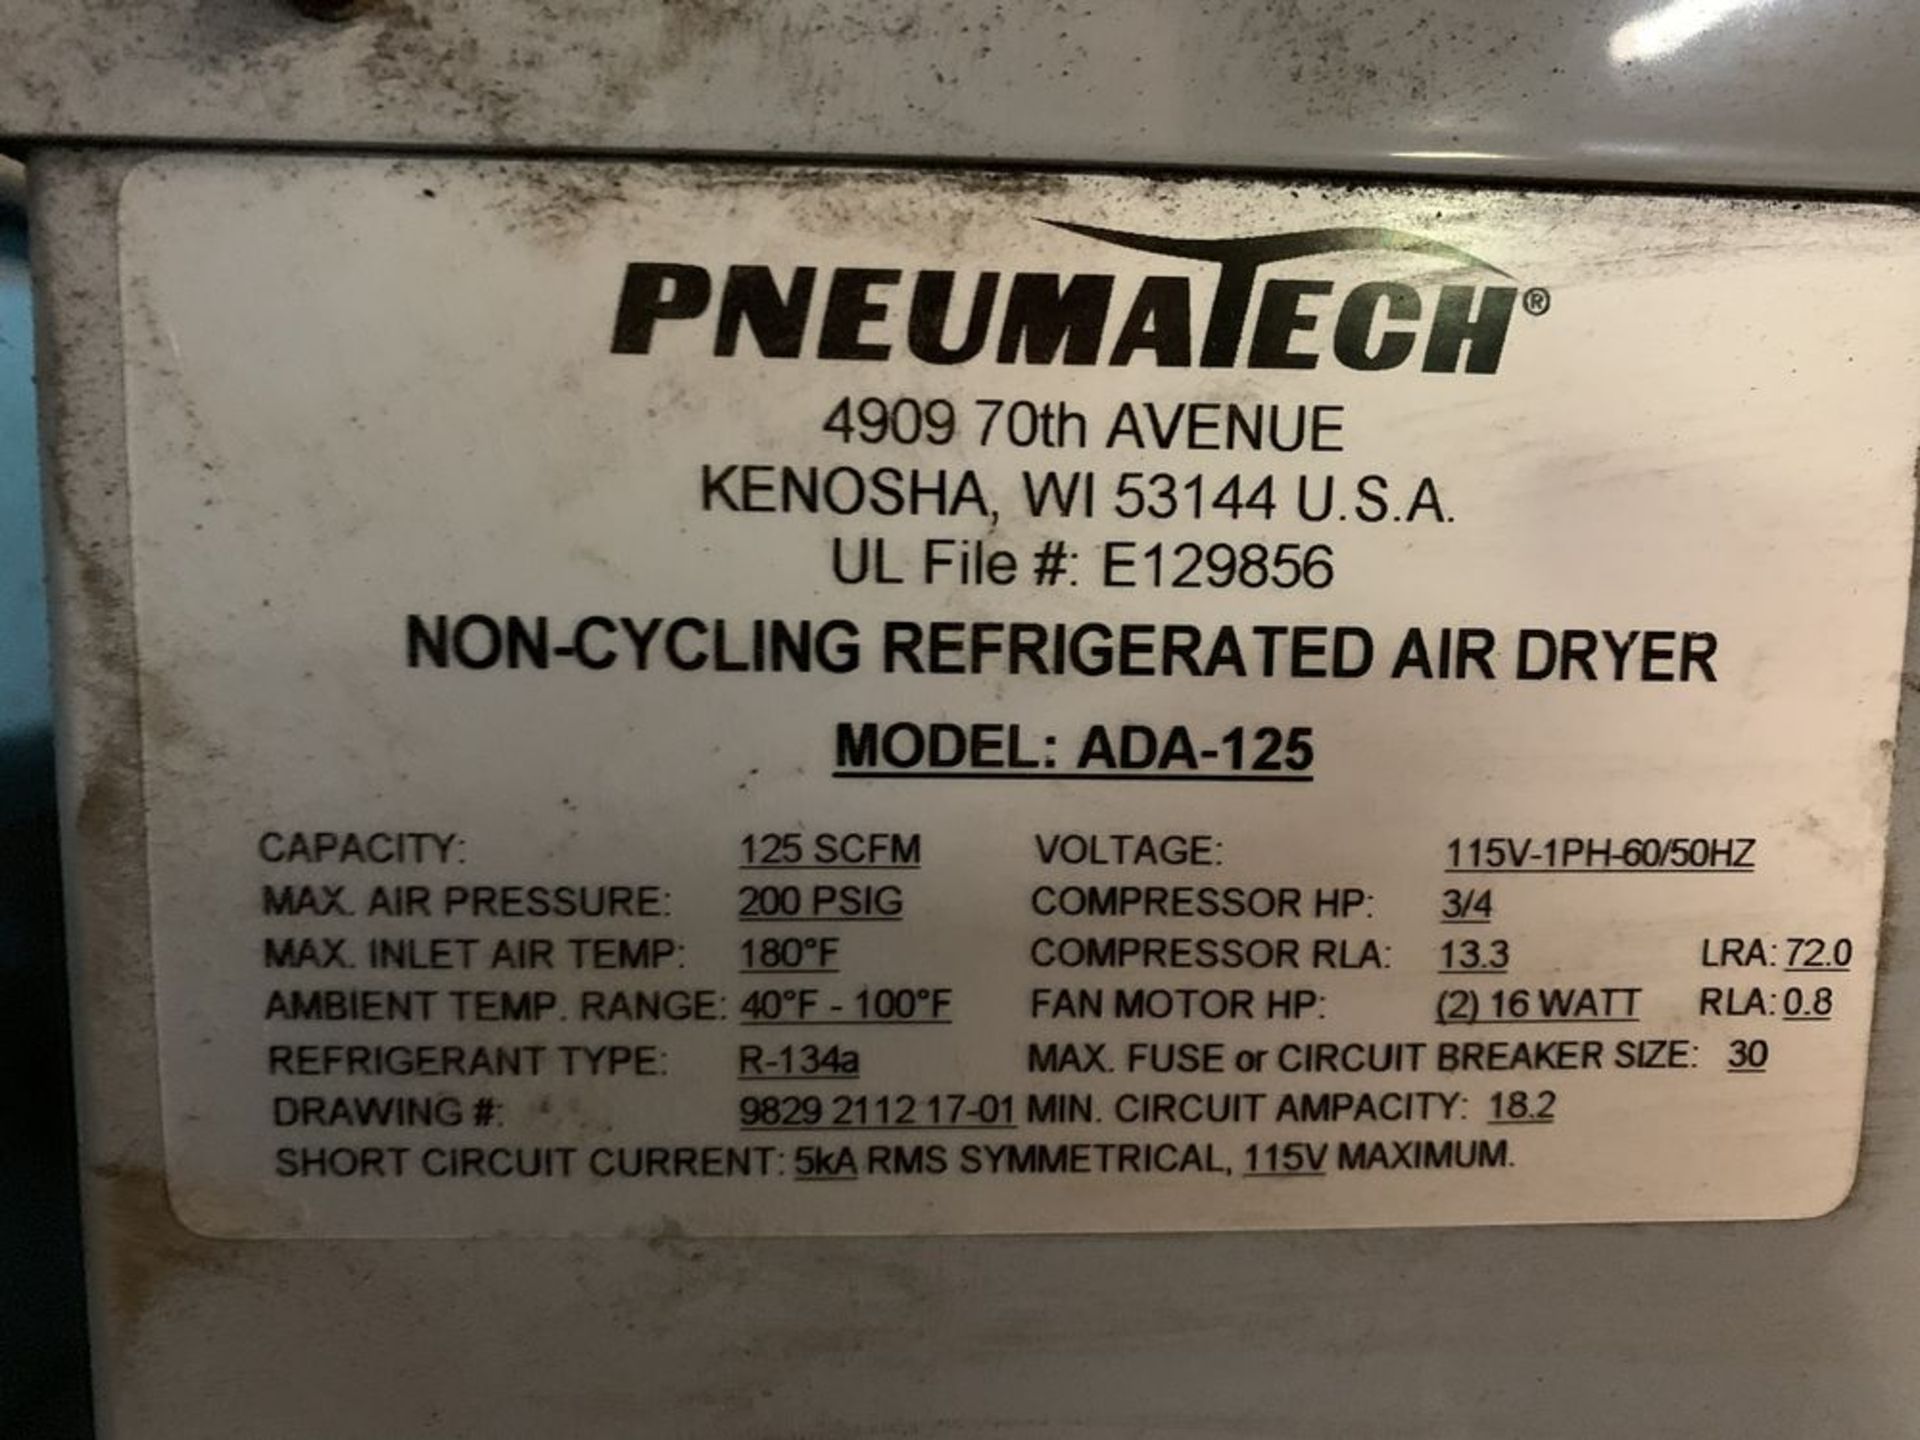 Pneumatech Model ADA-125 Refrigerated Air Dryer - Image 2 of 2